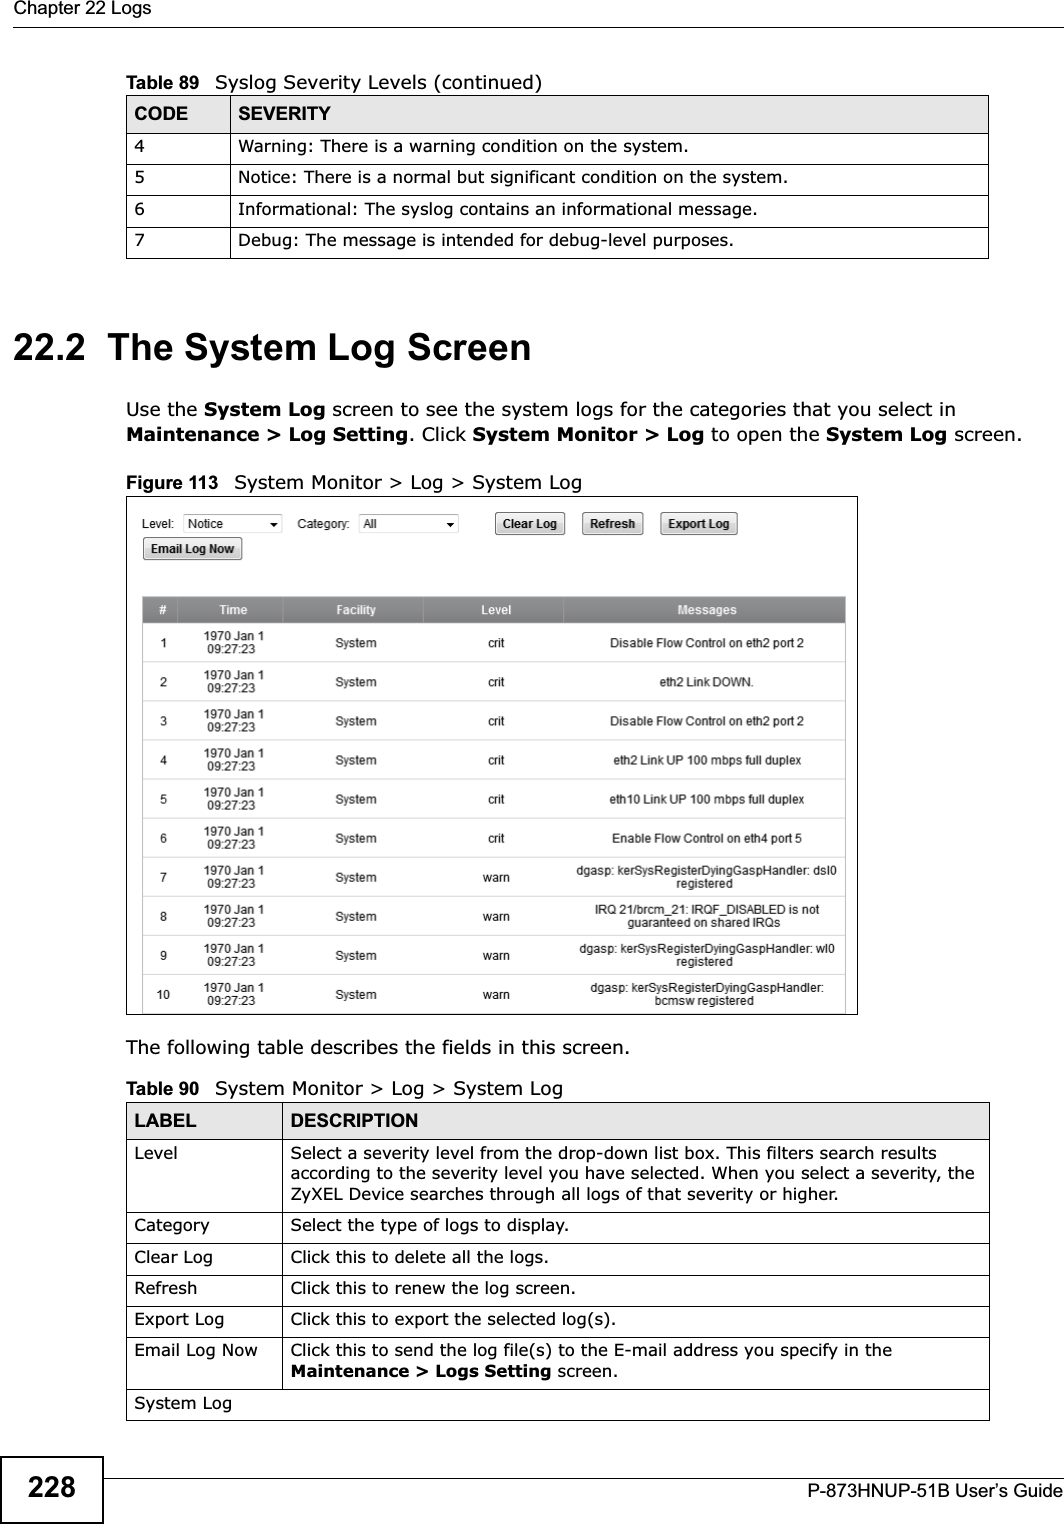 Chapter 22 LogsP-873HNUP-51B User’s Guide22822.2  The System Log Screen Use the System Log screen to see the system logs for the categories that you select in Maintenance &gt; Log Setting. Click System Monitor &gt; Log to open the System Log screen. Figure 113   System Monitor &gt; Log &gt; System LogThe following table describes the fields in this screen.   4 Warning: There is a warning condition on the system.5 Notice: There is a normal but significant condition on the system.6 Informational: The syslog contains an informational message.7 Debug: The message is intended for debug-level purposes.Table 89   Syslog Severity Levels (continued)CODE SEVERITYTable 90   System Monitor &gt; Log &gt; System LogLABEL DESCRIPTIONLevel Select a severity level from the drop-down list box. This filters search results according to the severity level you have selected. When you select a severity, the ZyXEL Device searches through all logs of that severity or higher. Category Select the type of logs to display.Clear Log  Click this to delete all the logs. Refresh Click this to renew the log screen. Export Log Click this to export the selected log(s).Email Log Now Click this to send the log file(s) to the E-mail address you specify in the Maintenance &gt; Logs Setting screen.System Log